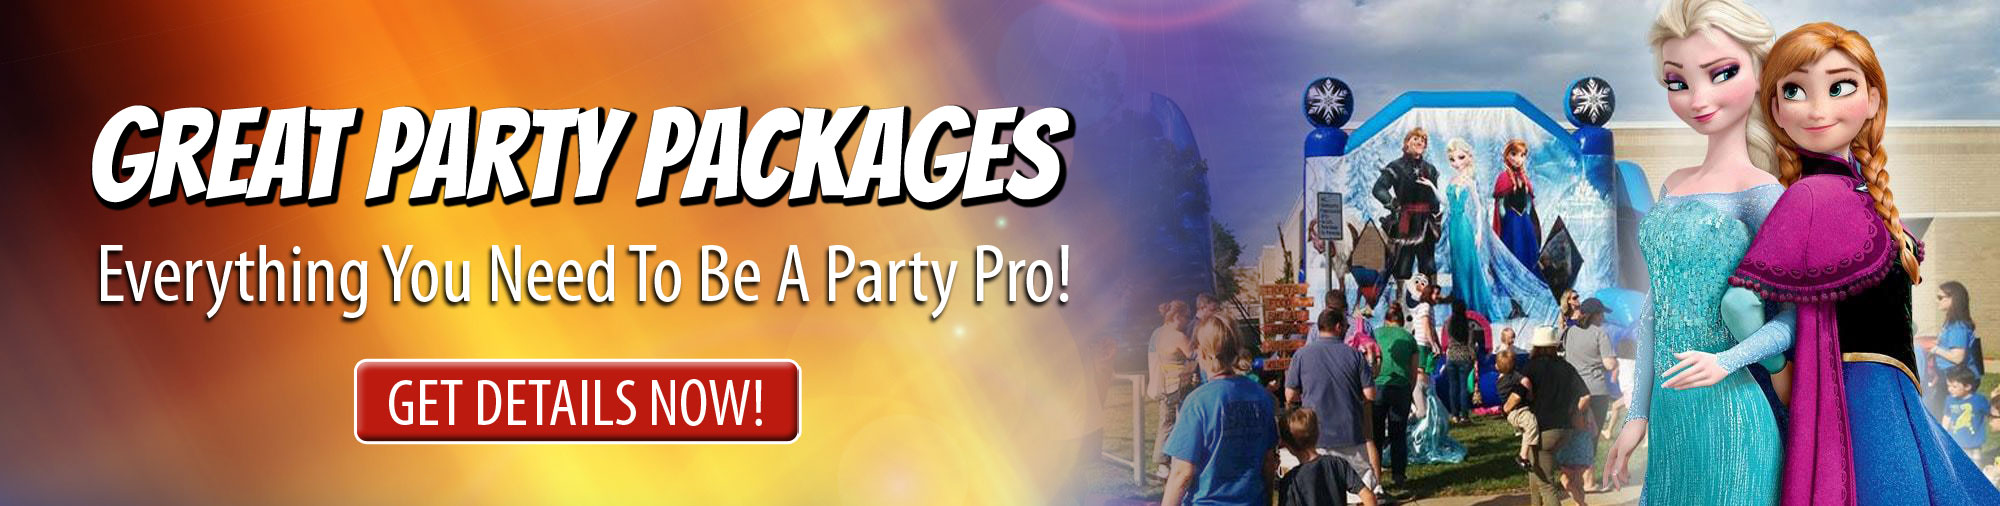 Party Package Rentals